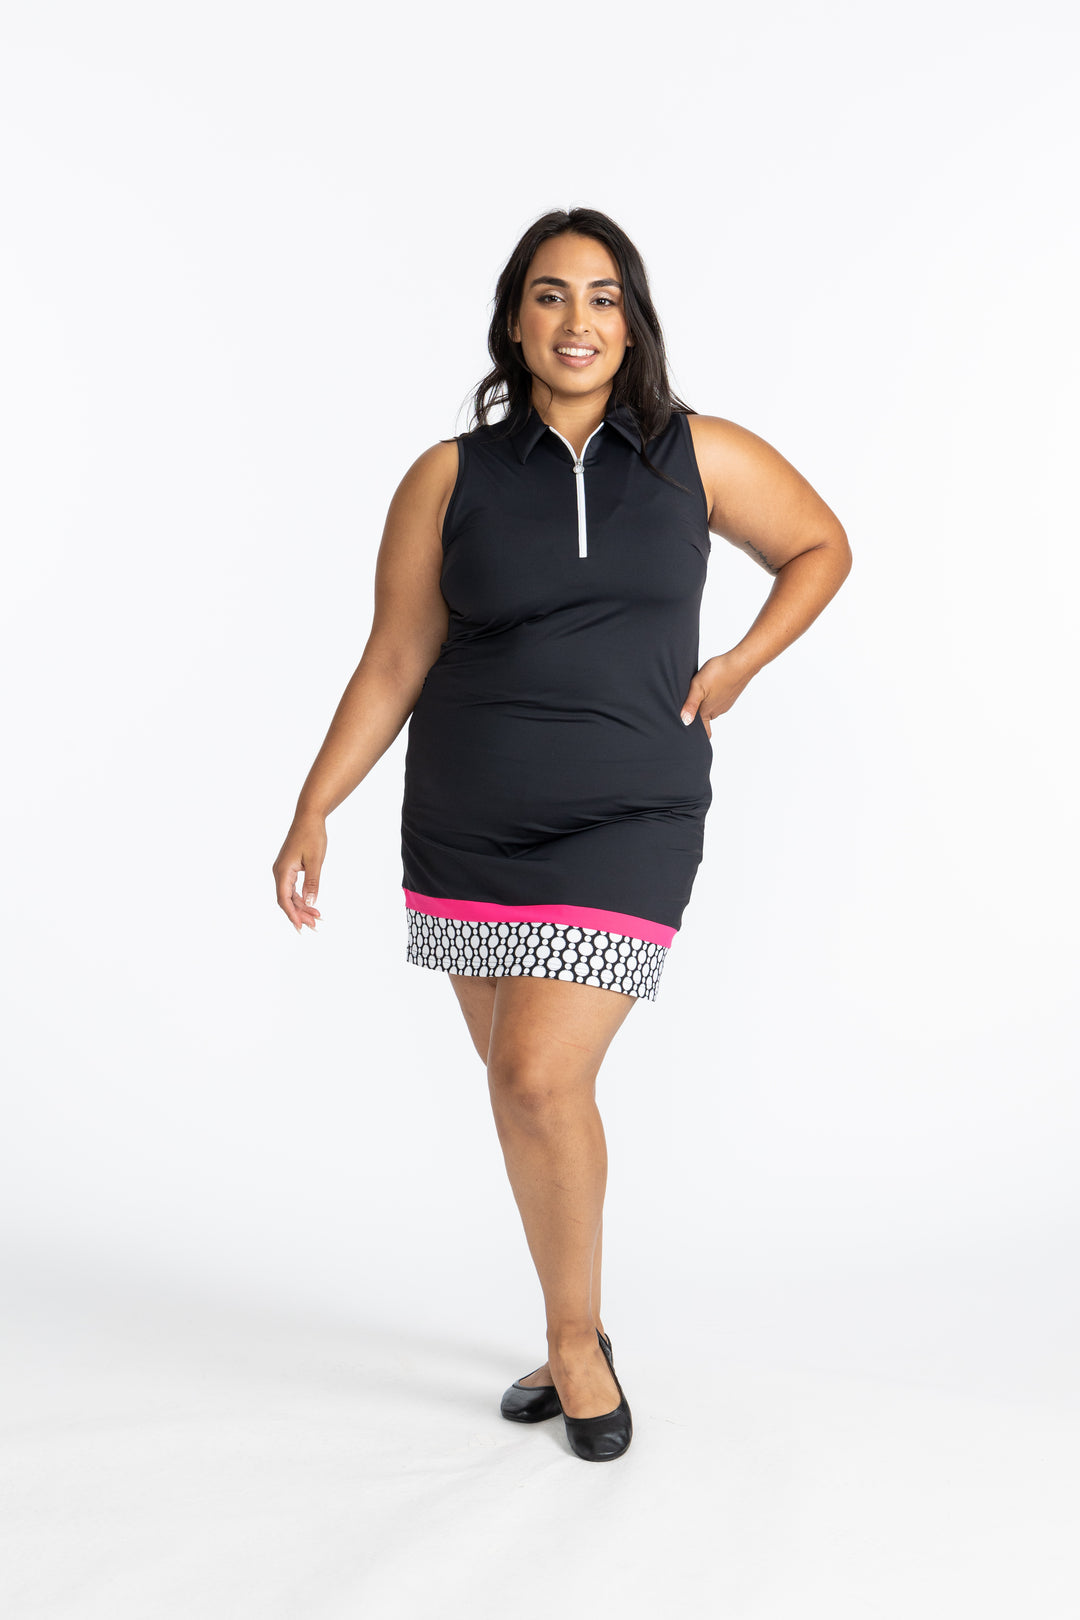 Who Makes Golf Clothing for Plus Size Women?